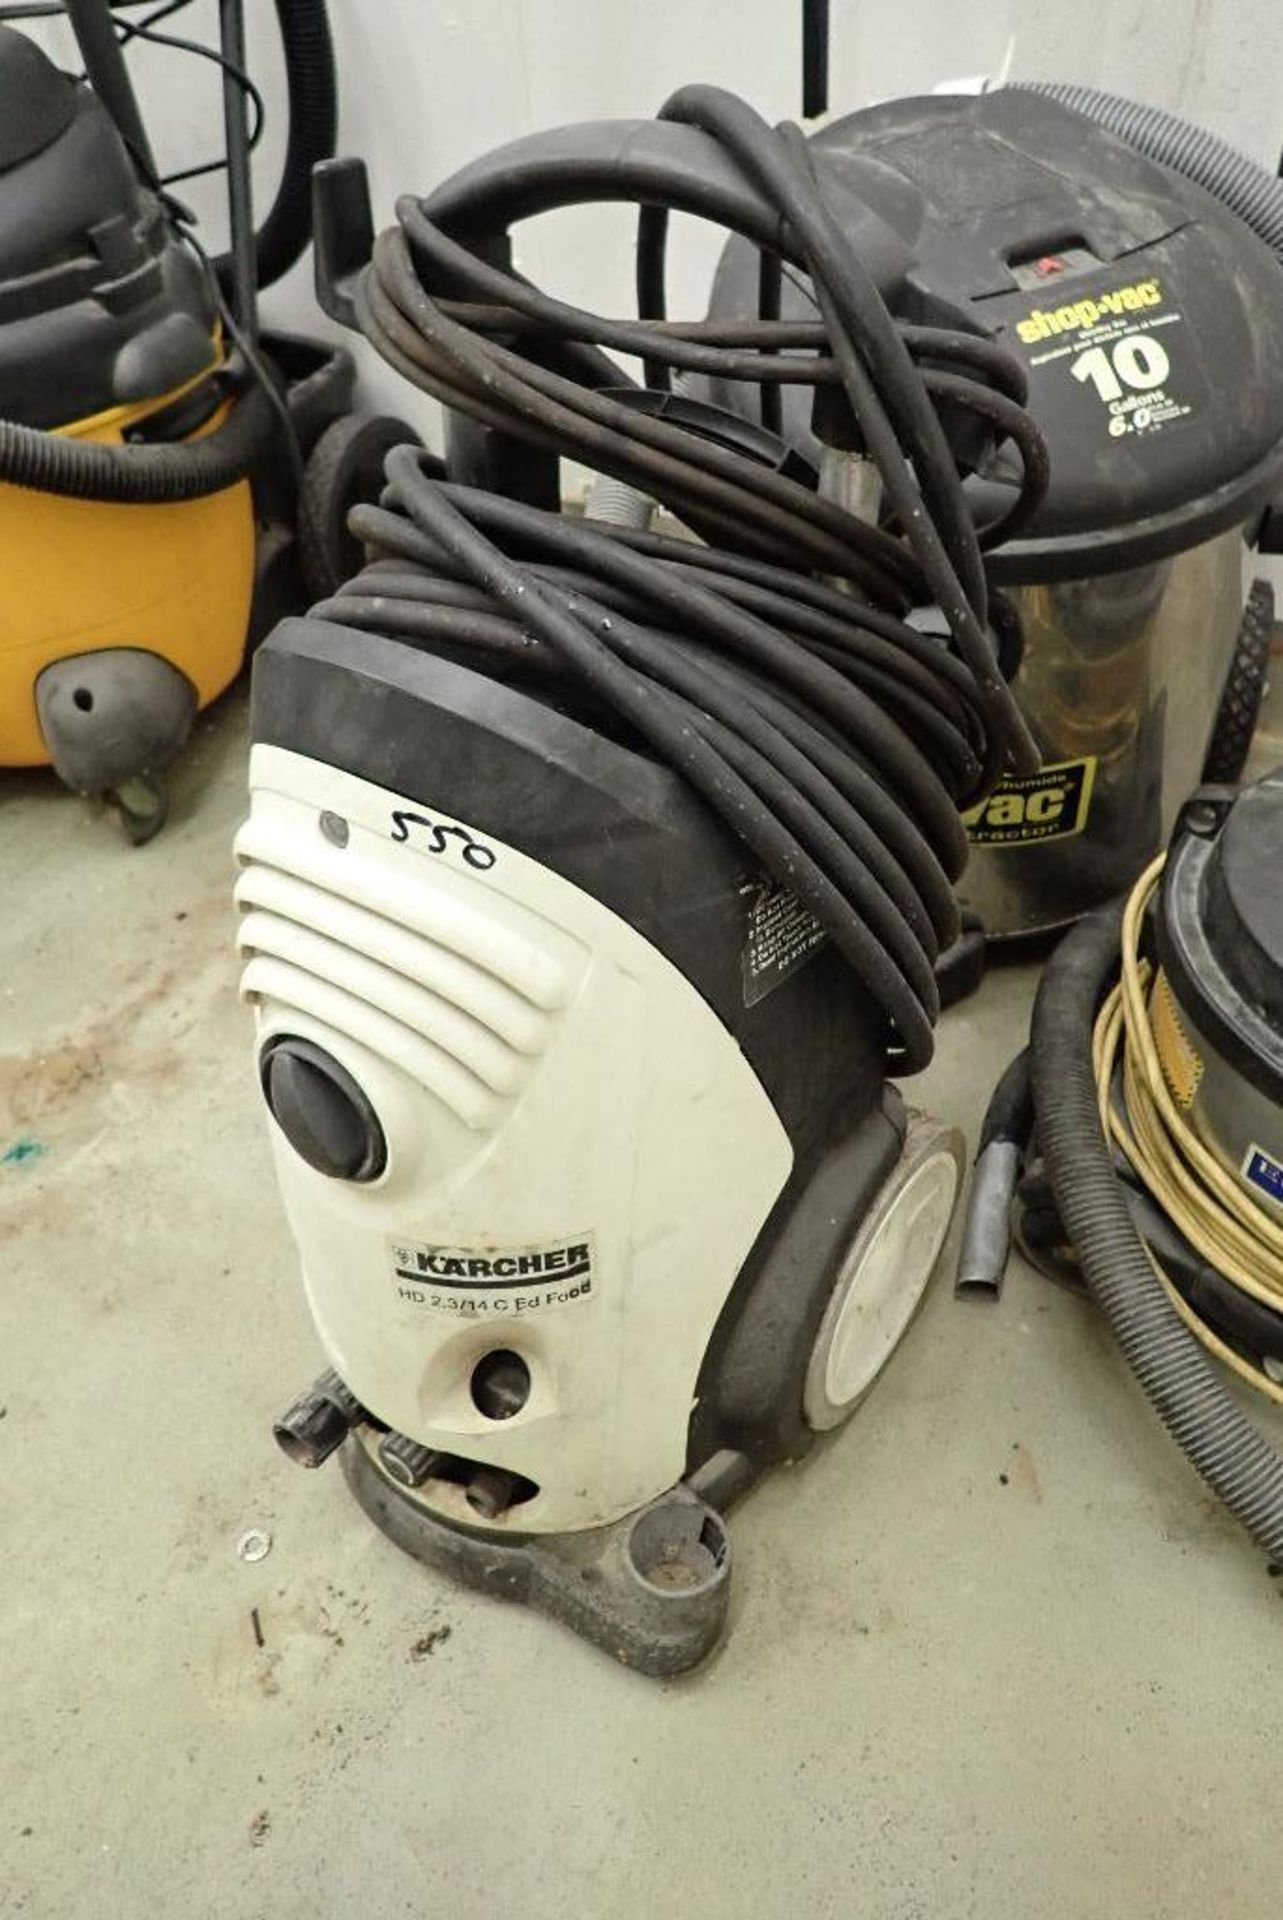 Karcher pressure washer, (2) shop vac. **Rigging Fee: $15** (Located in Delta, BC Canada.) - Image 4 of 7